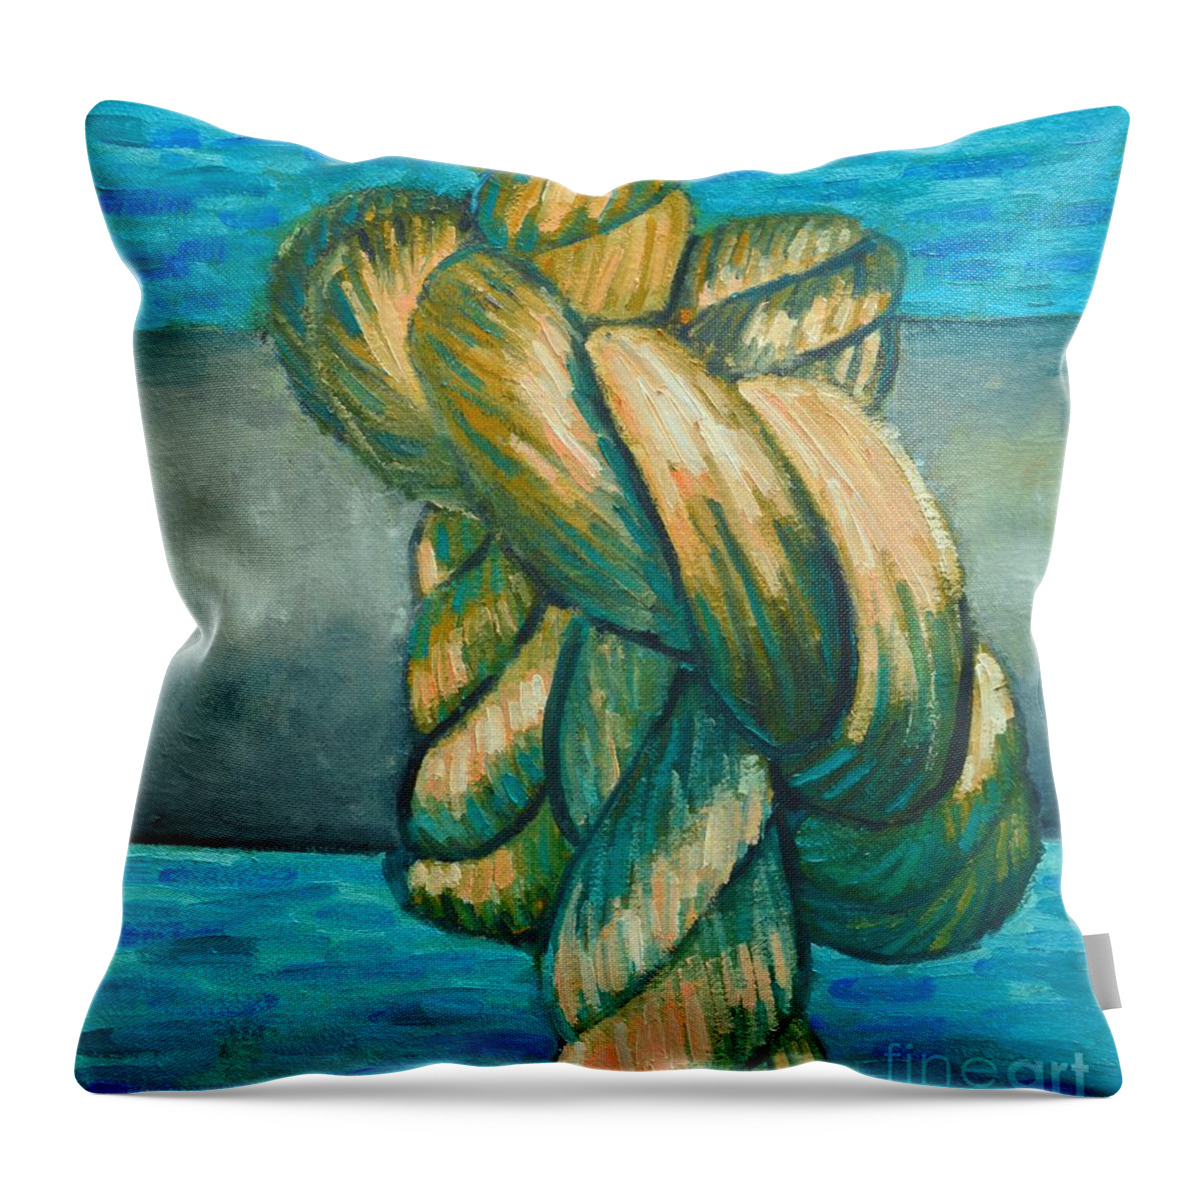 Knot Throw Pillow featuring the painting Sailor Knot 9 by Ana Maria Edulescu